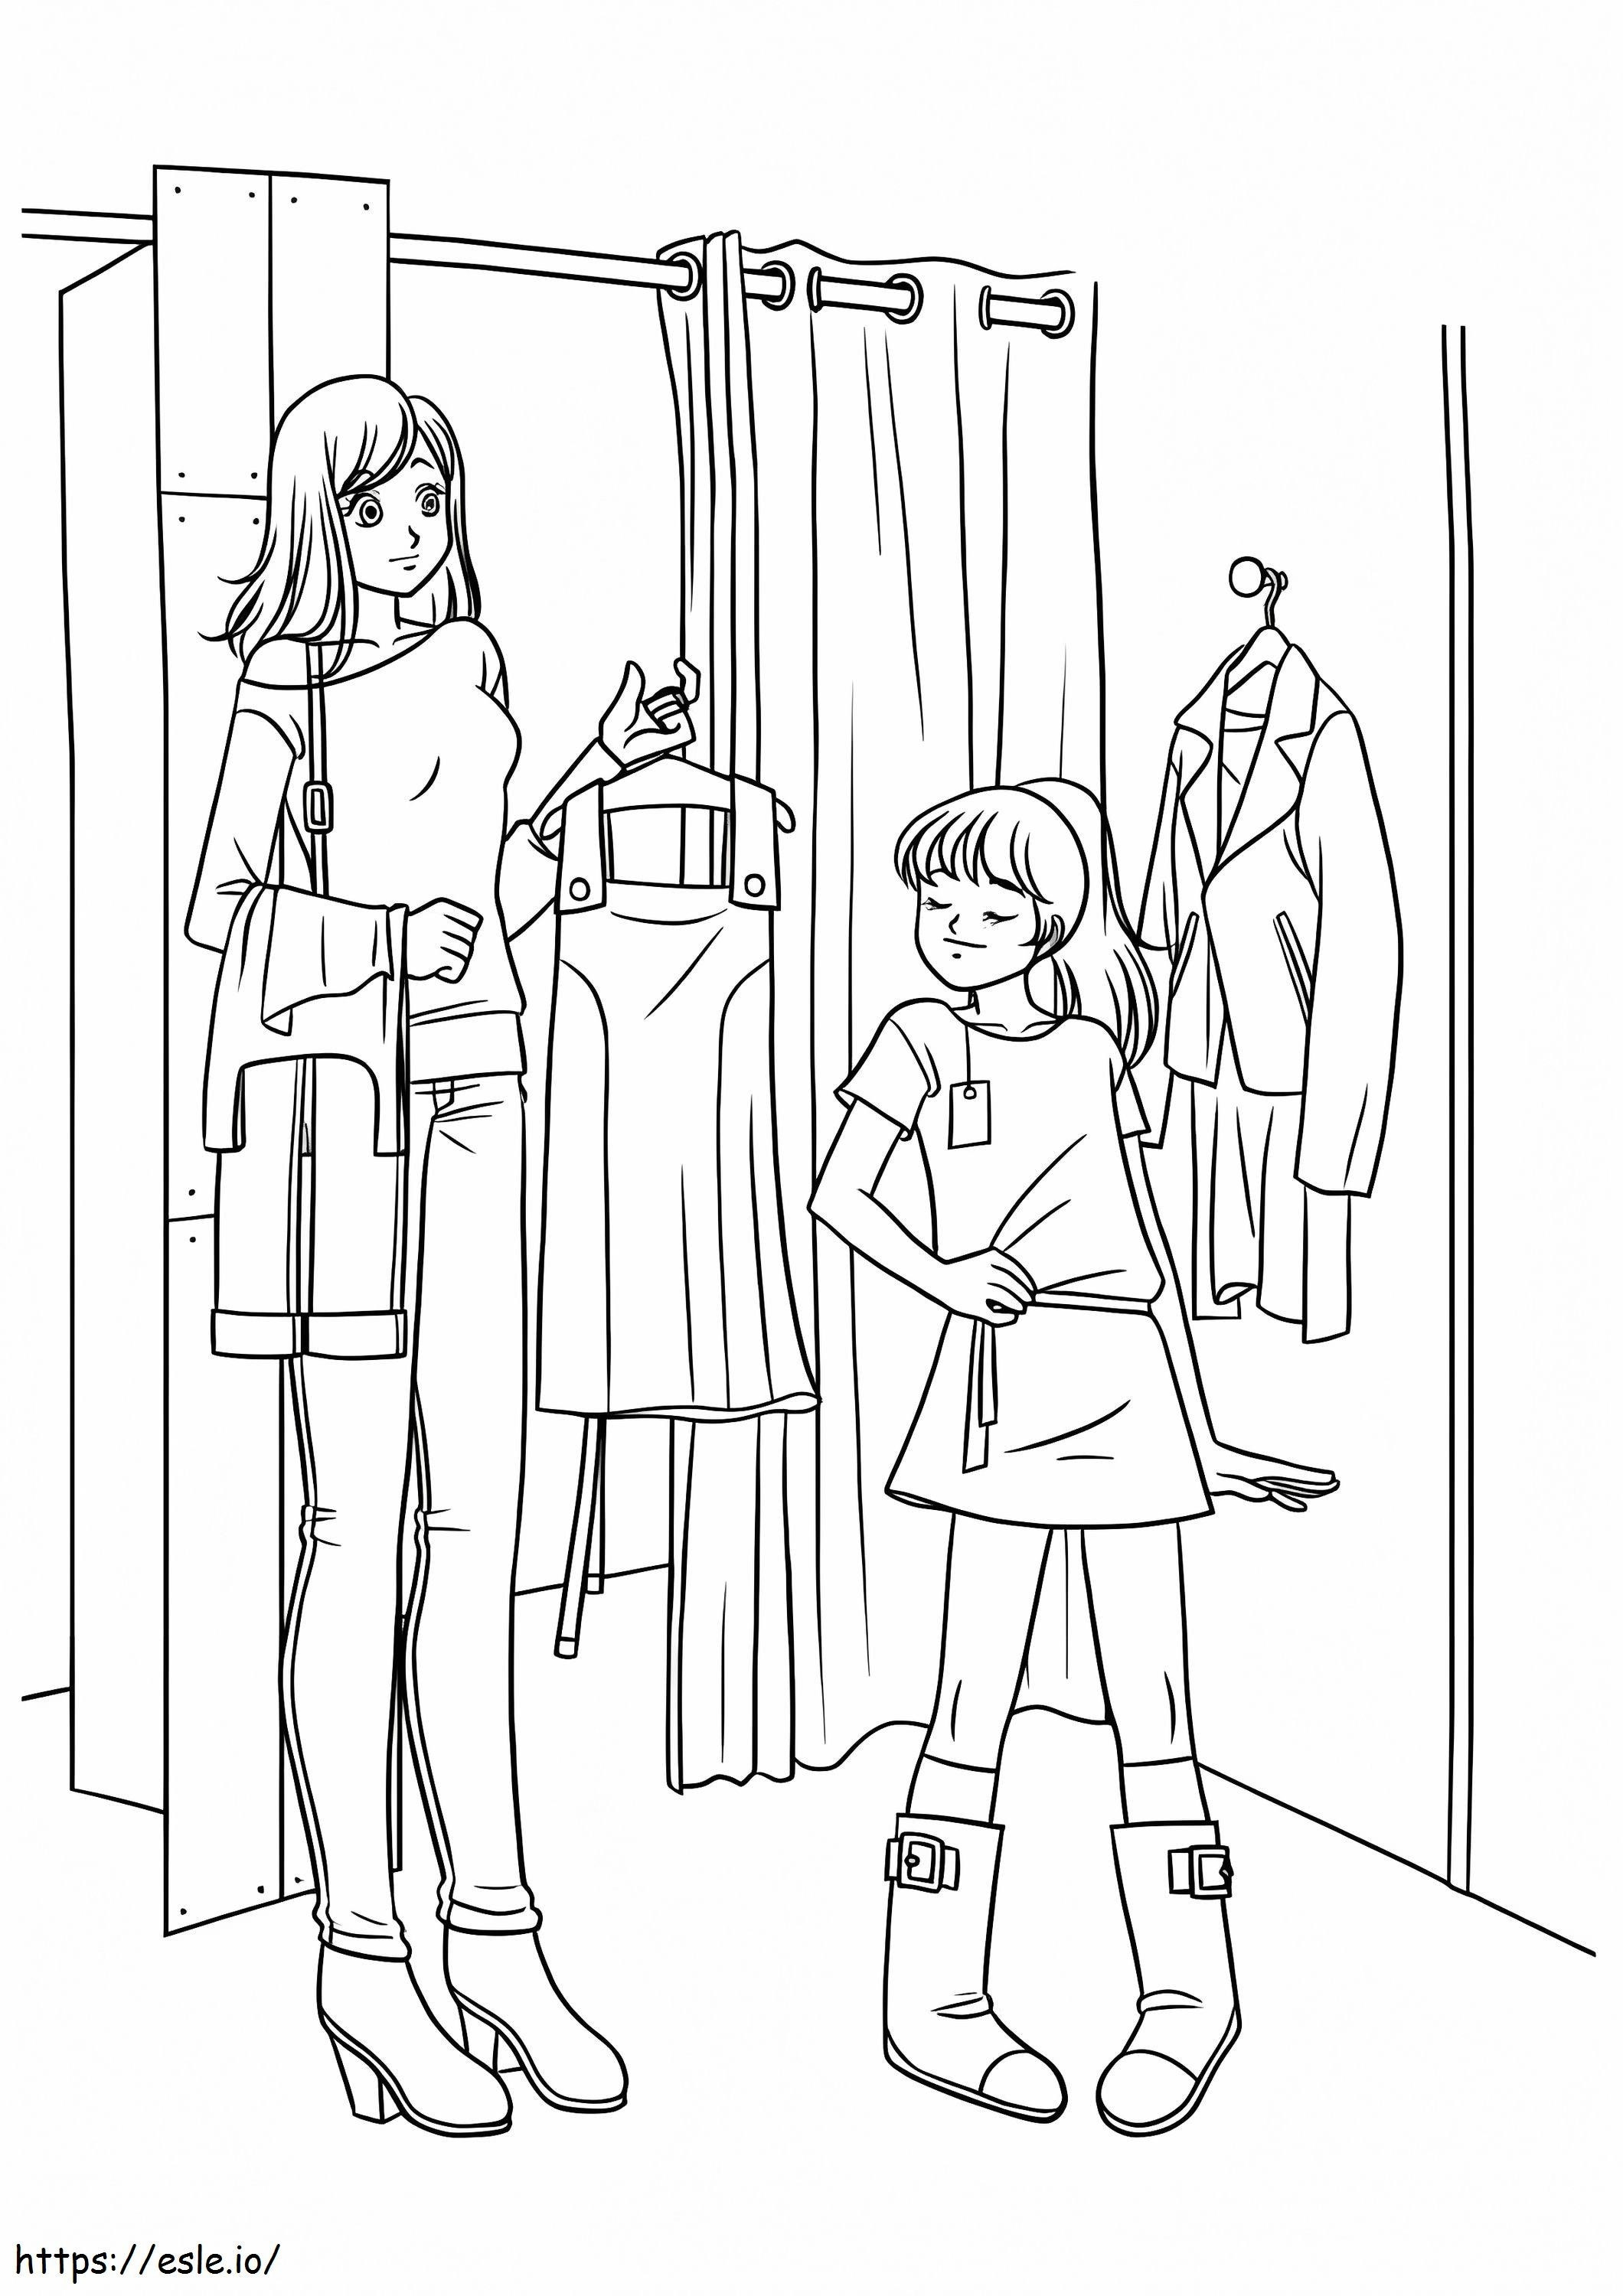 Girls In Fitting Room coloring page